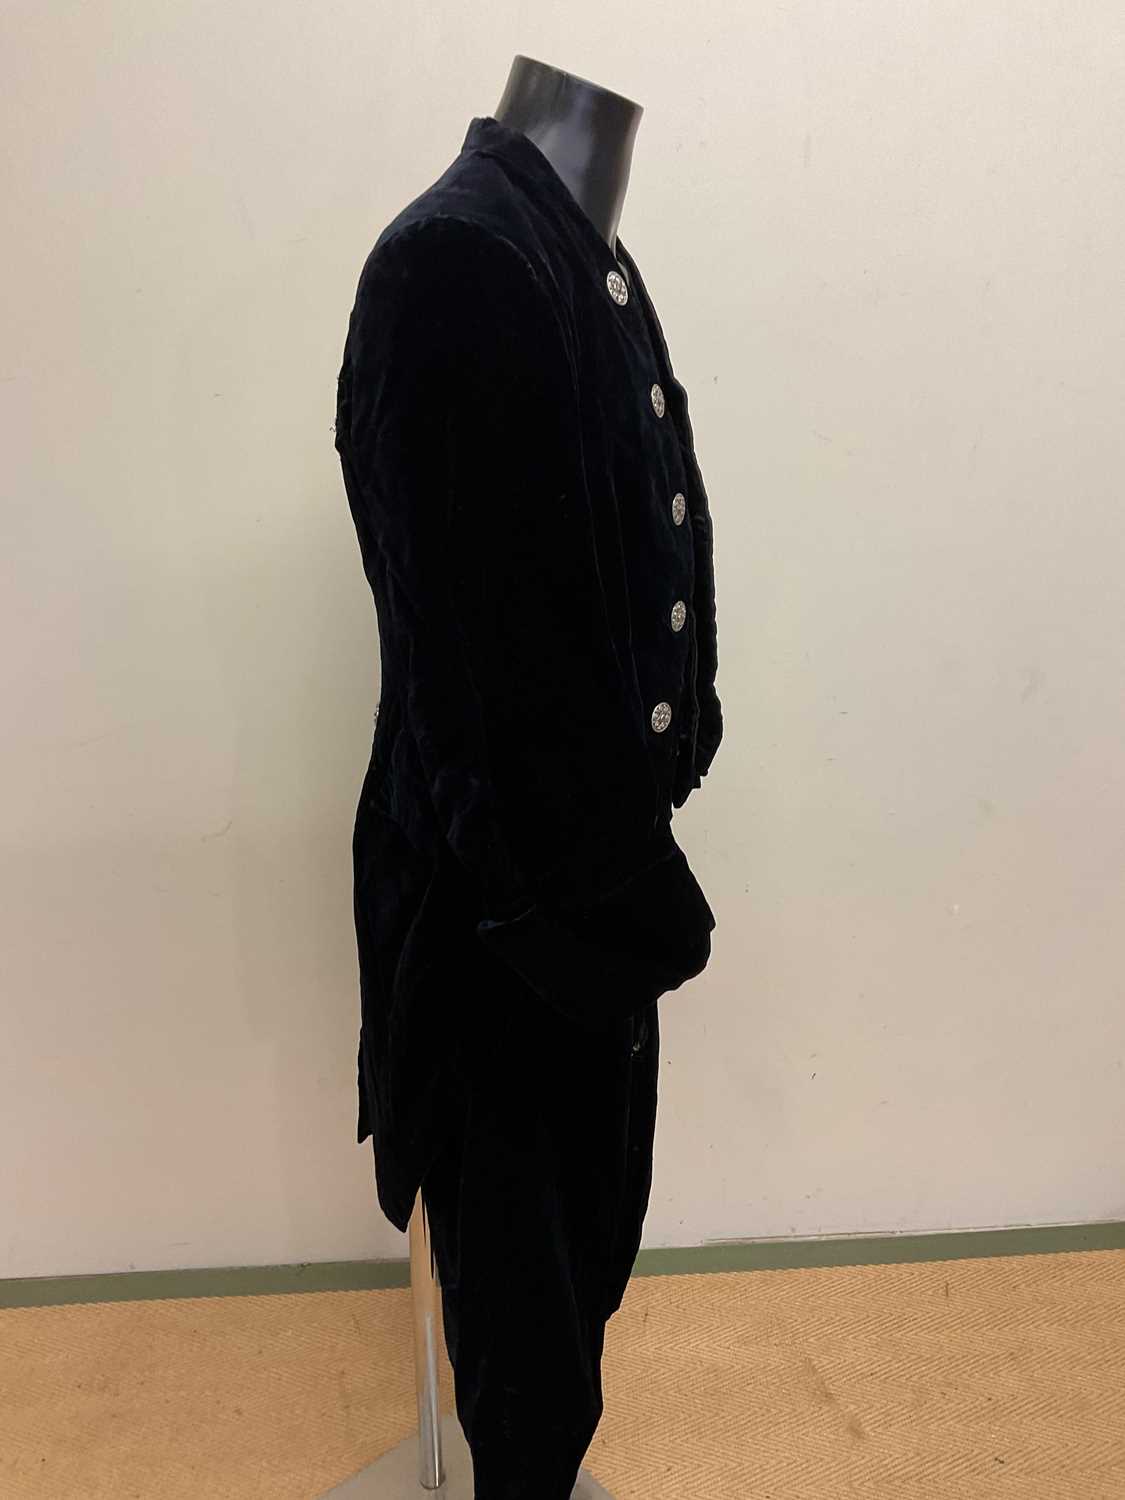 A vintage man's velvet tailcoat with waistcoat and knickerbockers, made by Robt F Gall, 13 Suffolk - Image 3 of 4